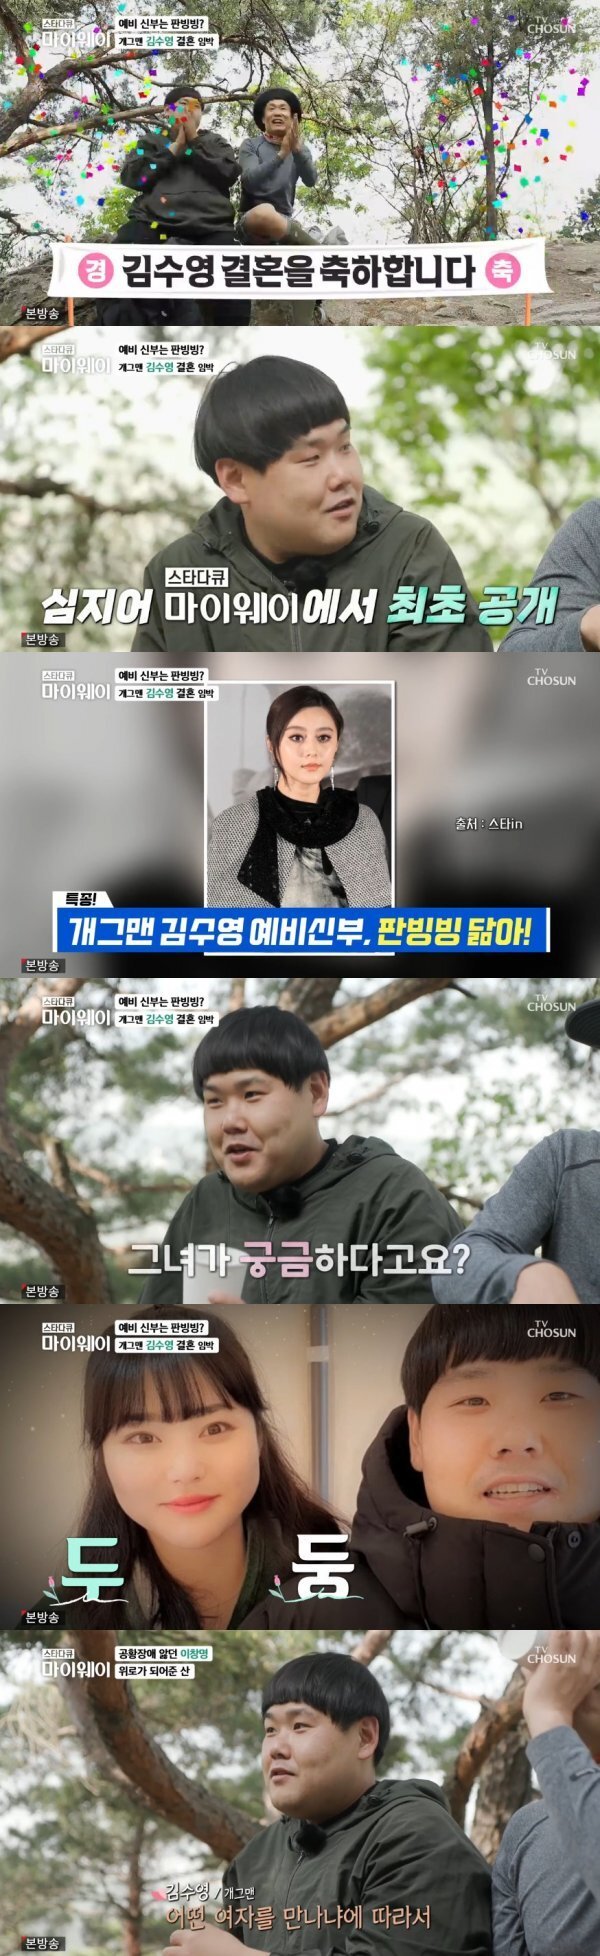 Kim Soo-young appeared on TV Chosun star documentary myway which was broadcast on the afternoon of the 22nd, and talked about GFriend while climbing with Chang-myeong Lee.Chang-myeong Lee was fortunate that the swimming pool has not had much marriage left, and Kim Soo-young said, I was here to play Confessions.Now, he looks like a middle school student, but he is 36 years old, so he is preparing to go. Kim Soo-young said, He catches me and catches me. I feel like Im going to grow up. I look like Fan BingbingOn the day of the broadcast, the face of GFriend, which resembles Fan Bingbing, was revealed and attracted attention.